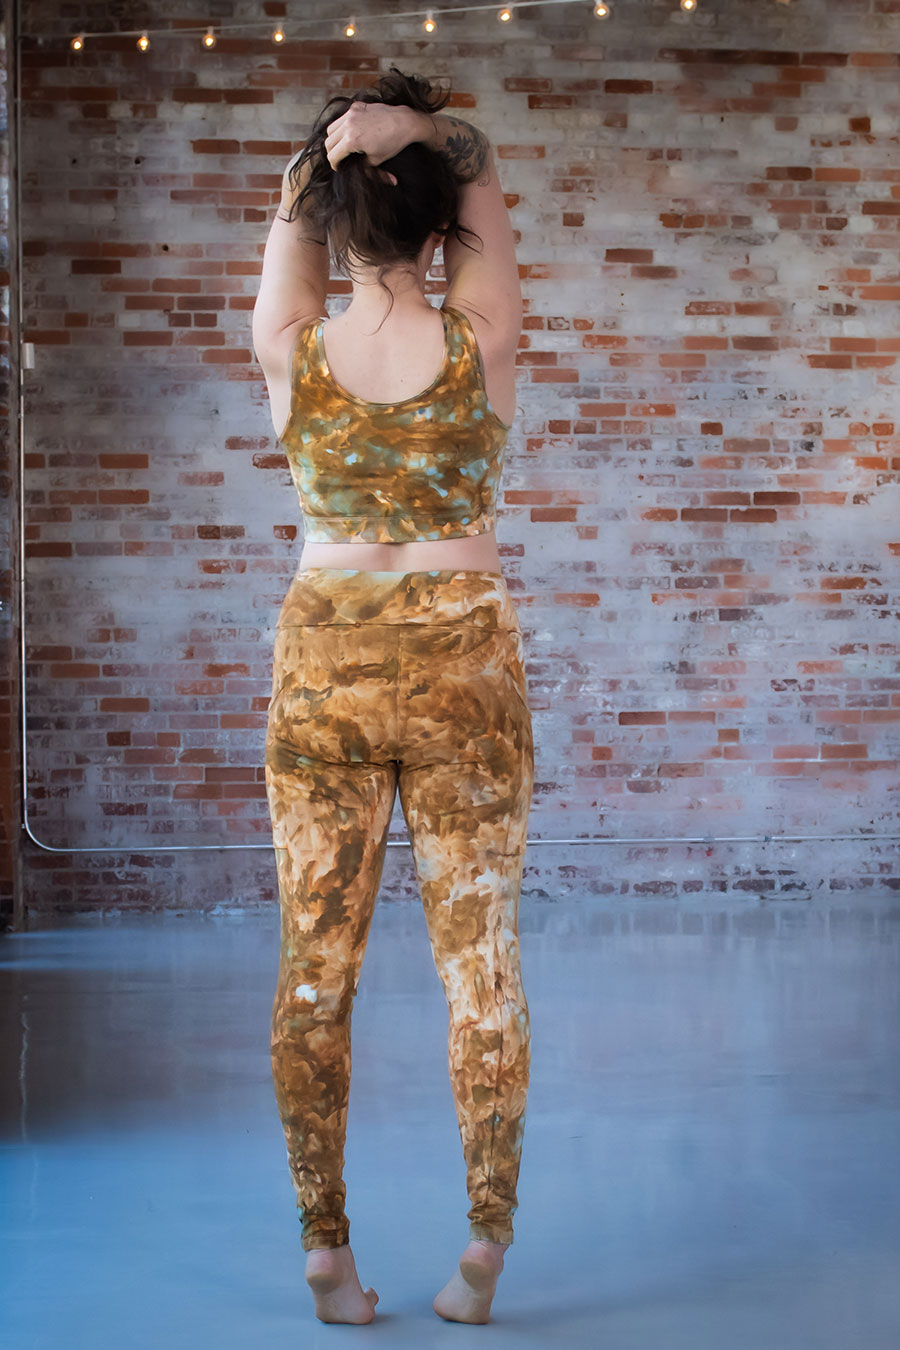 Sew Liberated Limestone Leggings and Top - The Fold Line